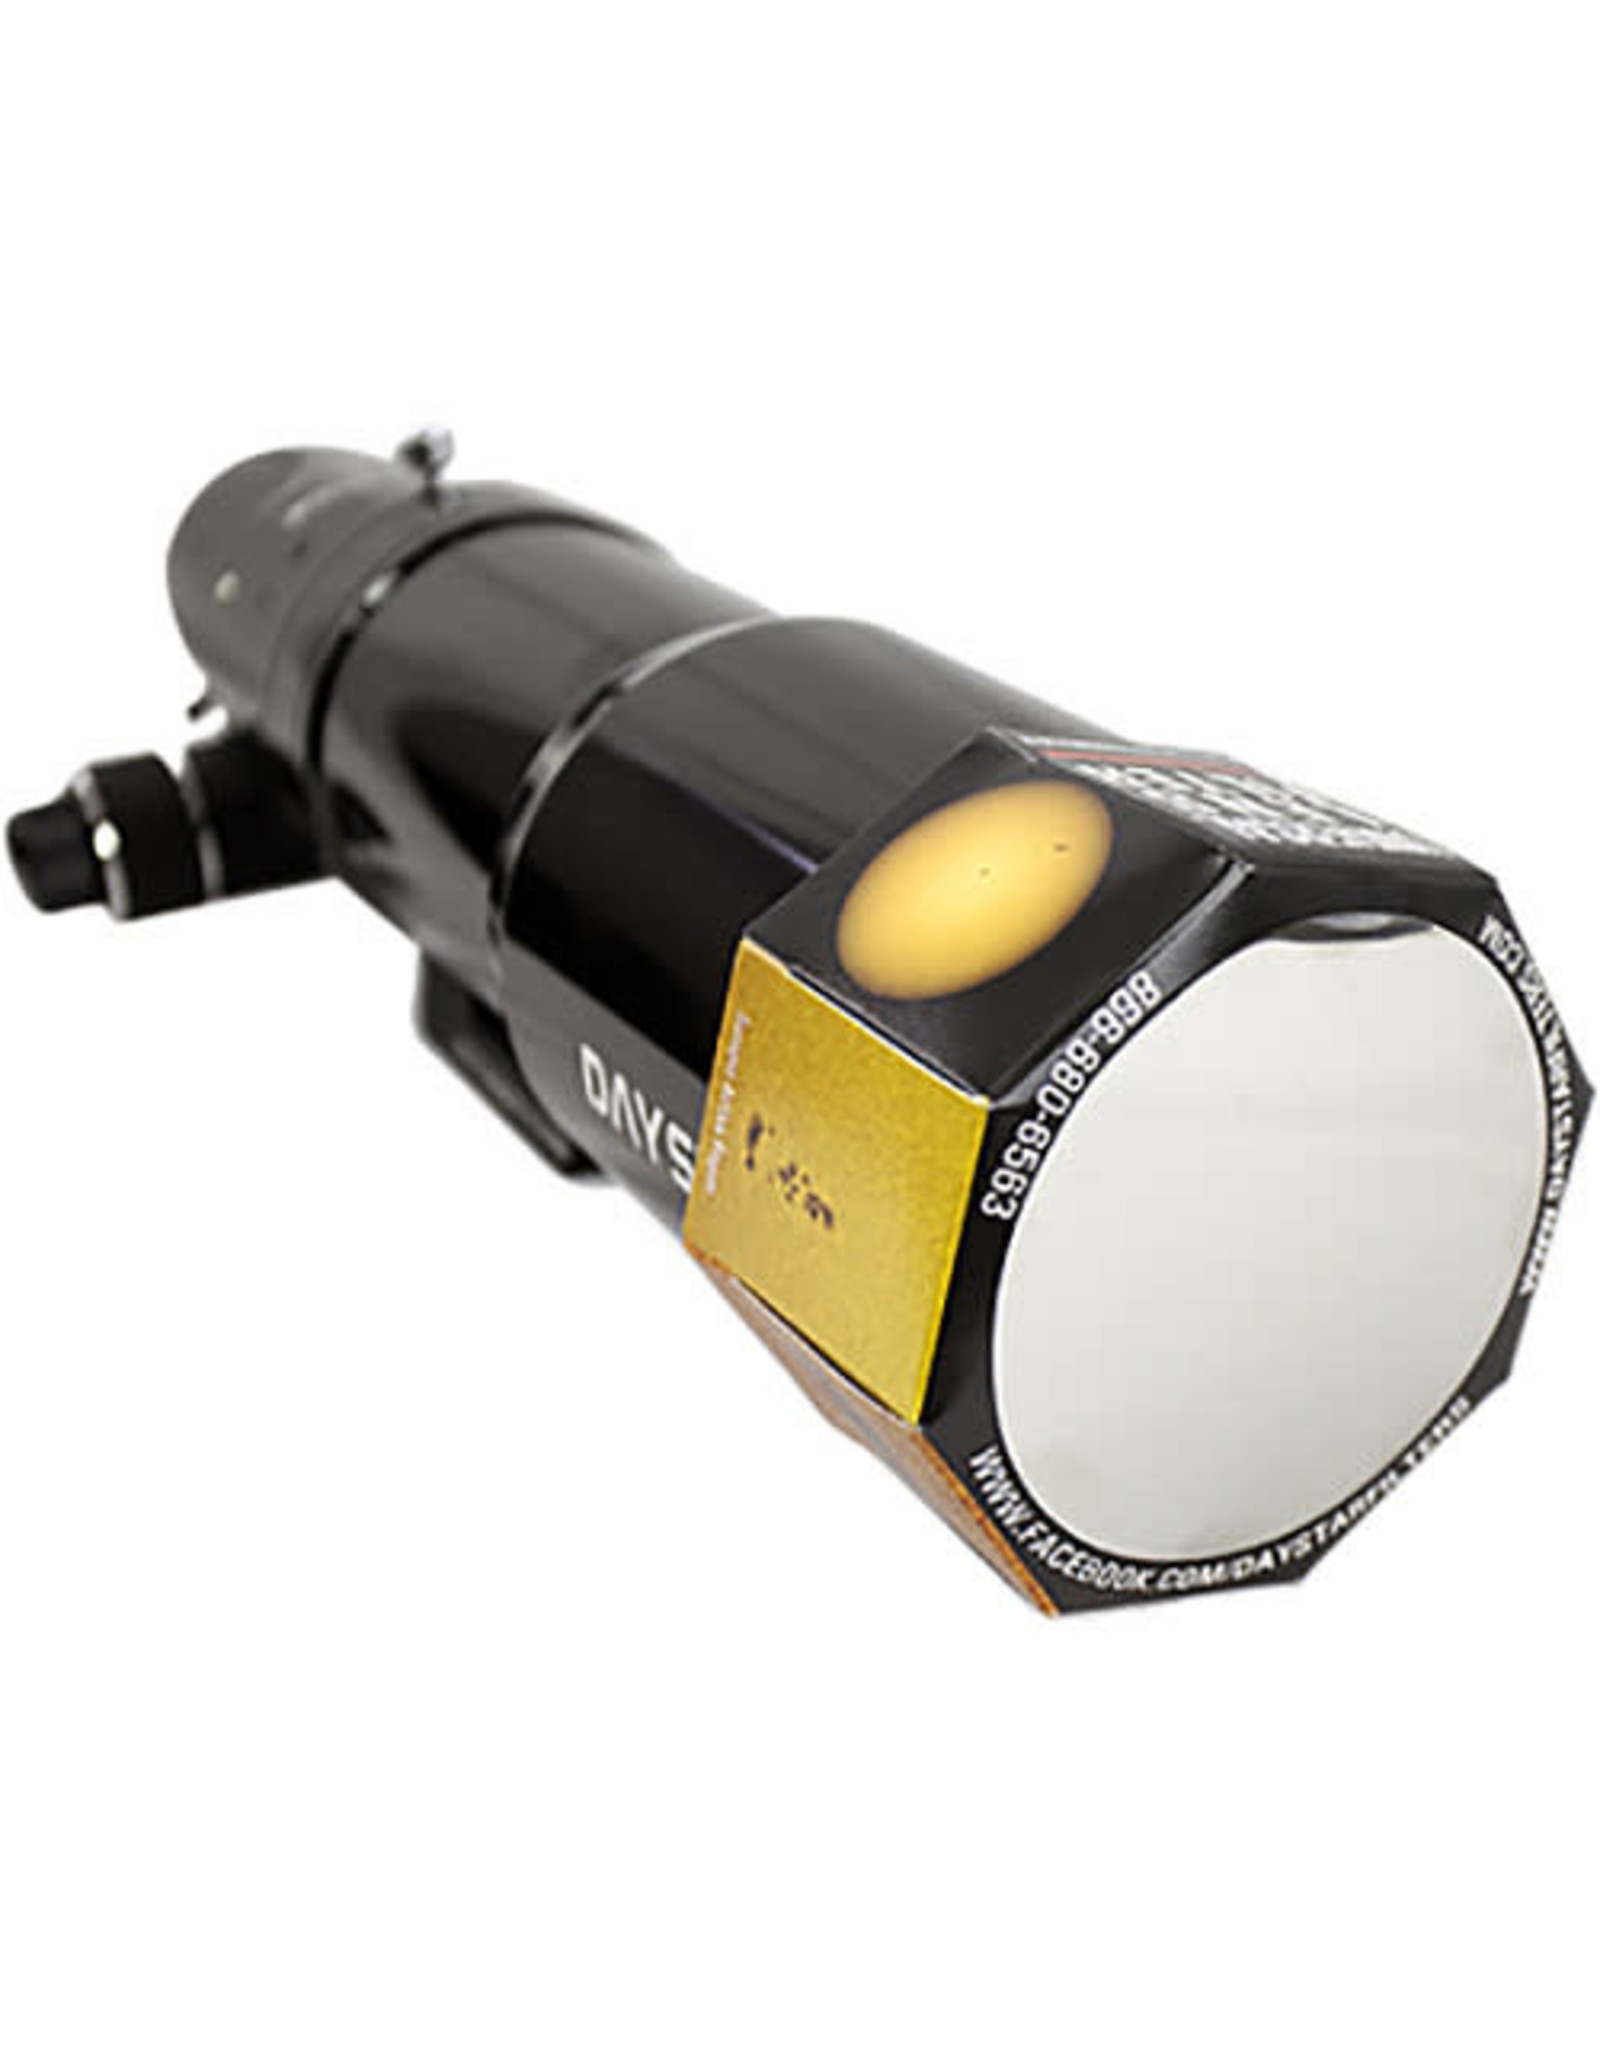 DayStar DayStar Filters White-Light ULF Solar Filter for Cameras or Small Telescopes (Specify Size)